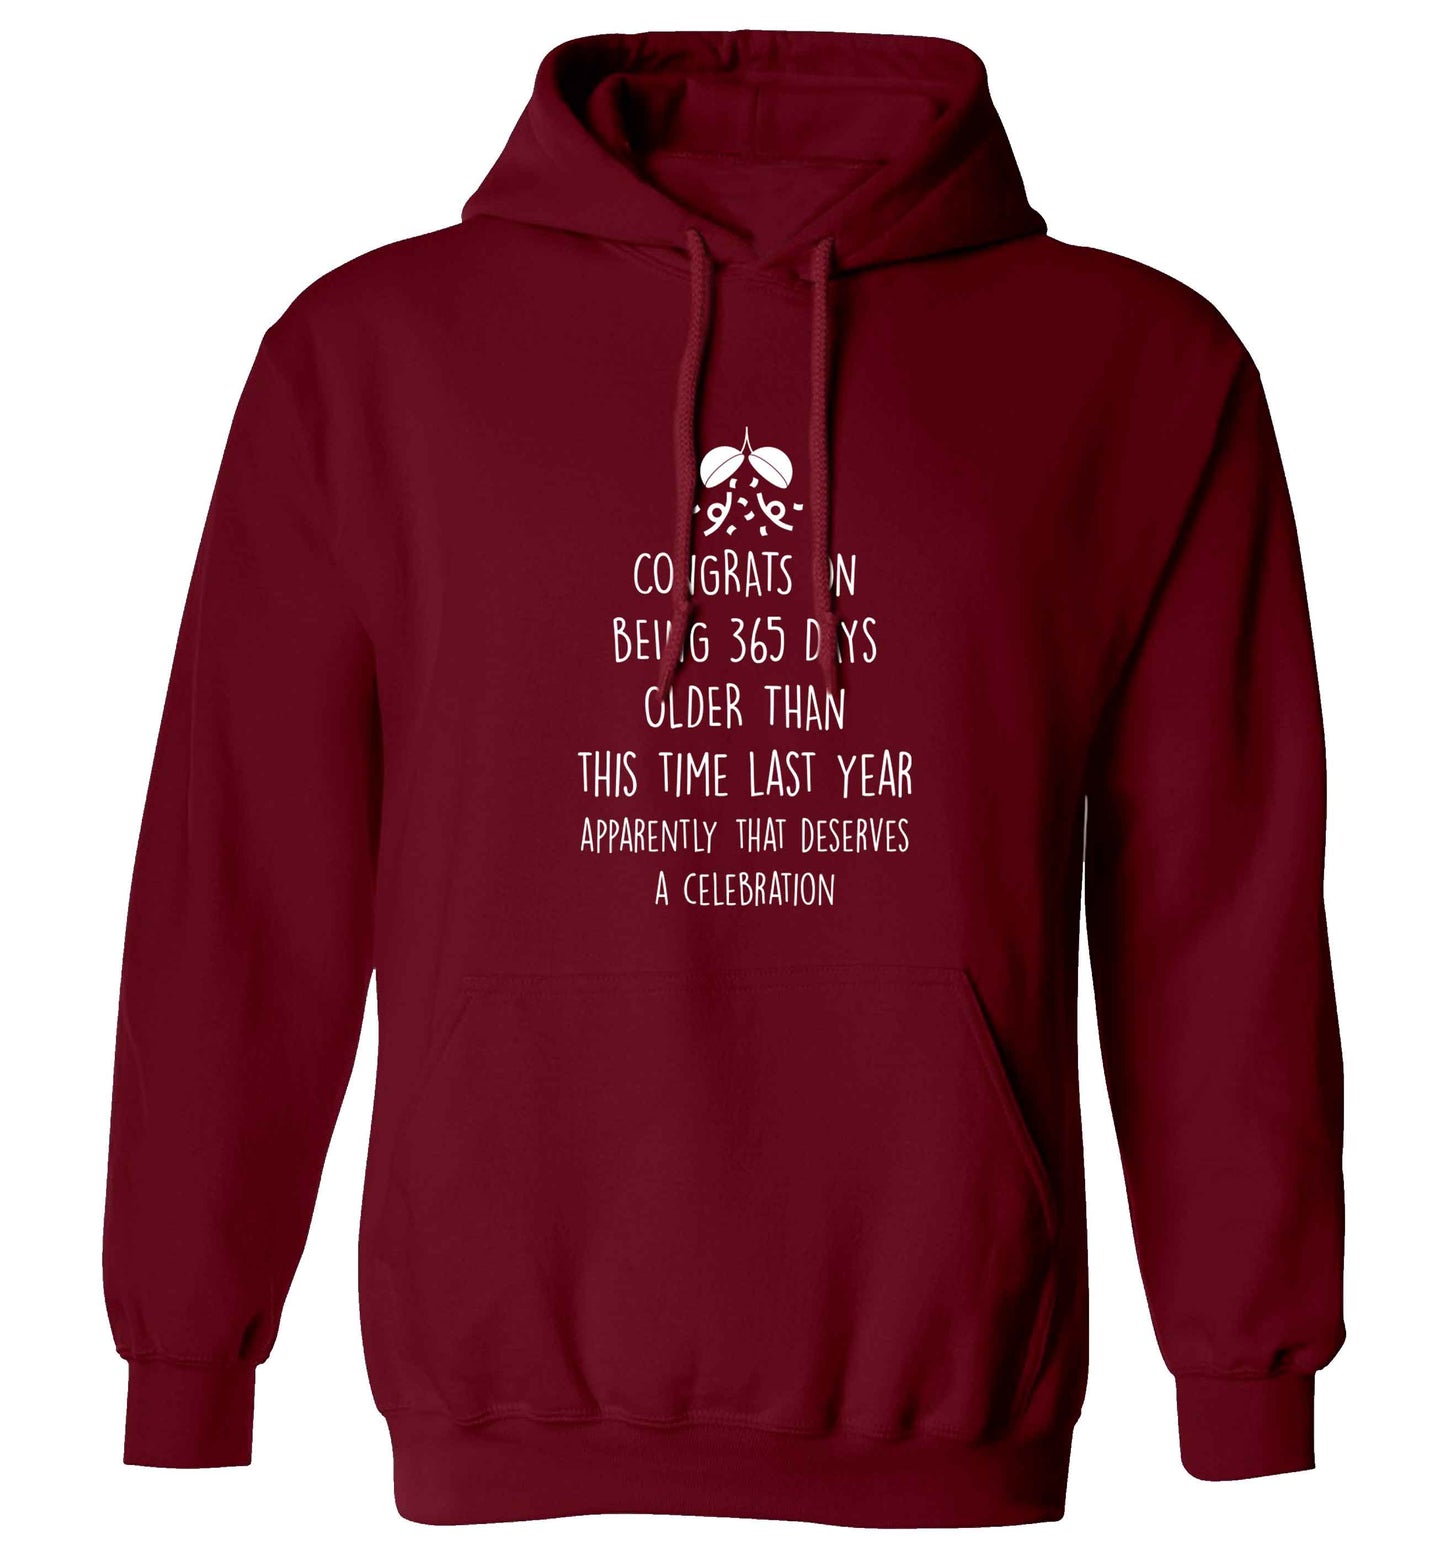 Congrats on being 365 days older than you were this time last year apparently that deserves a celebration adults unisex maroon hoodie 2XL